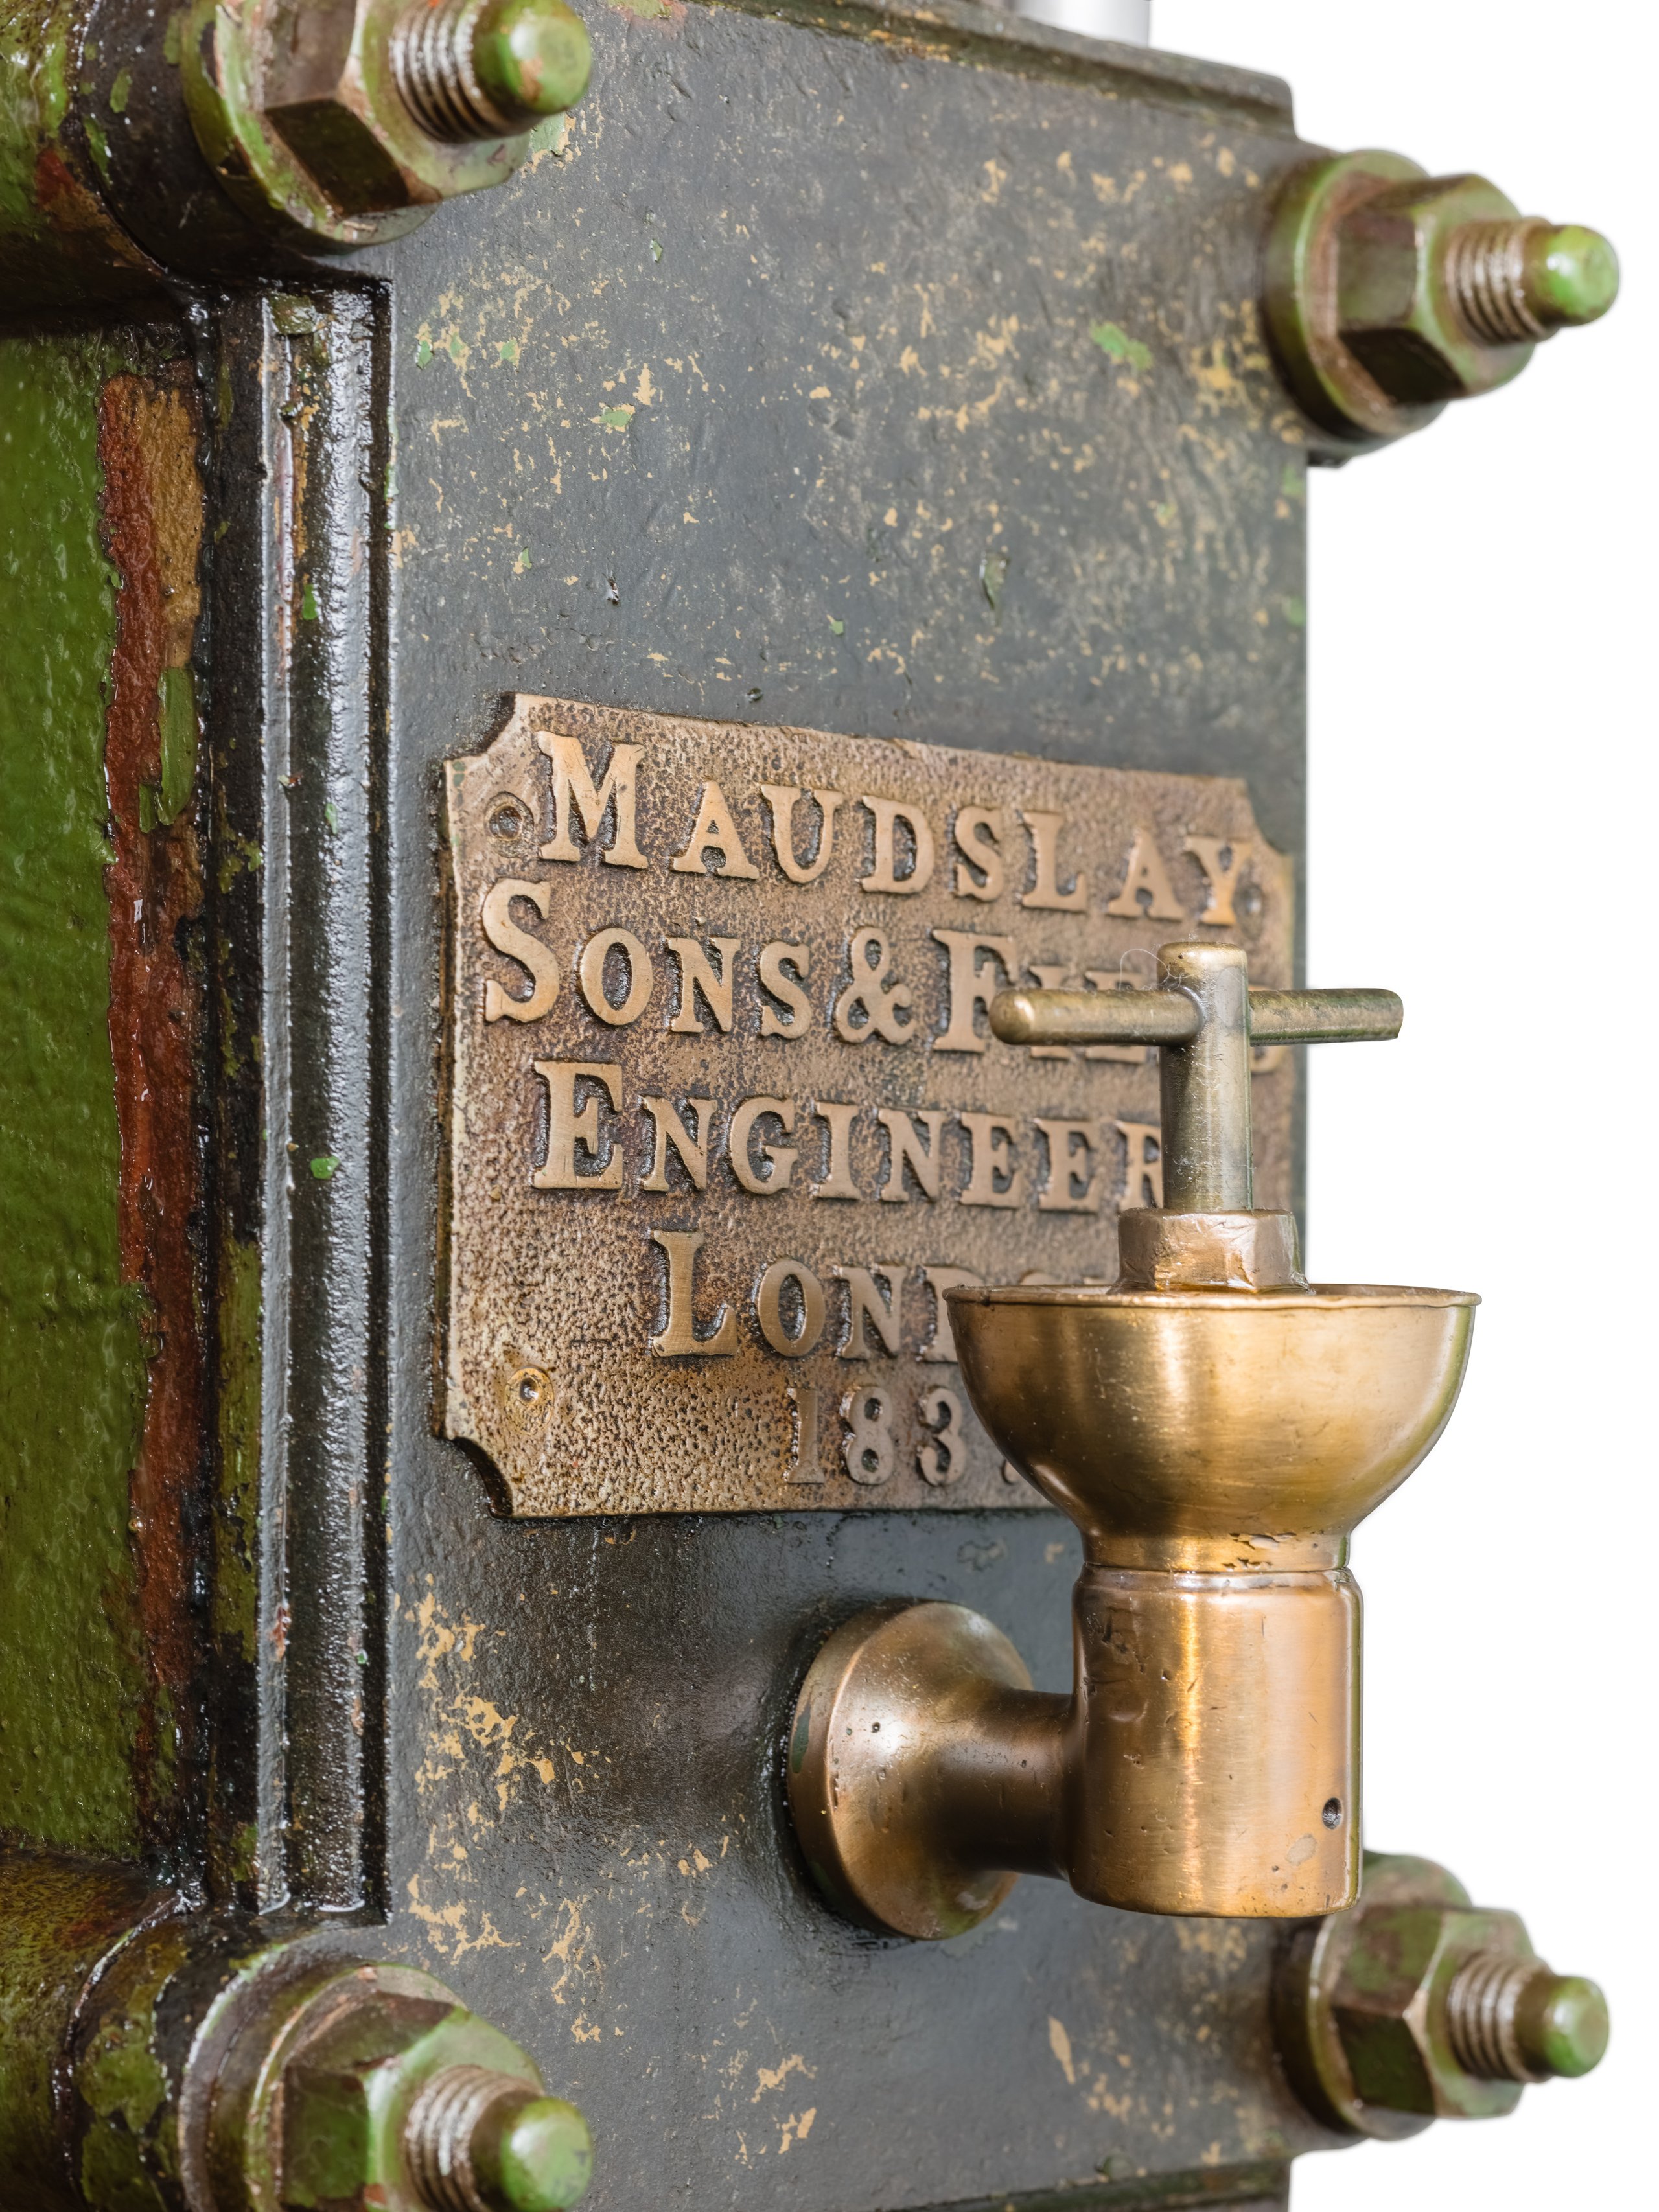 Beam engine made by Maudslay Sons & Field, London, 1837, used at Goulburn, NSW, c.1838-1921